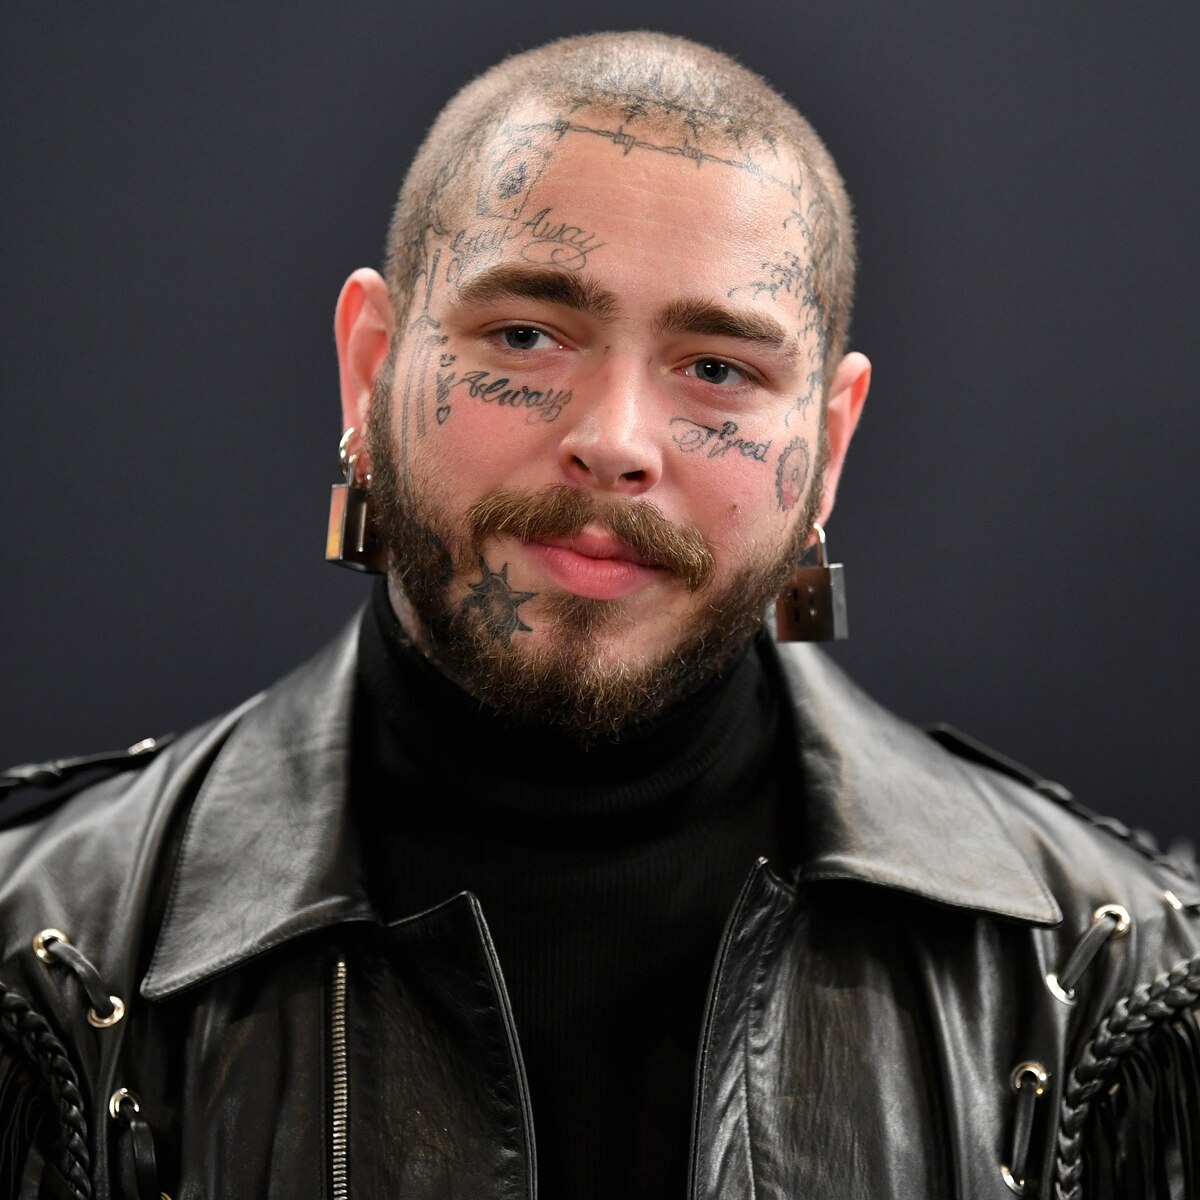 Post Malone's New Face Tattoo Will Have You Saying "Wow" - E! Online